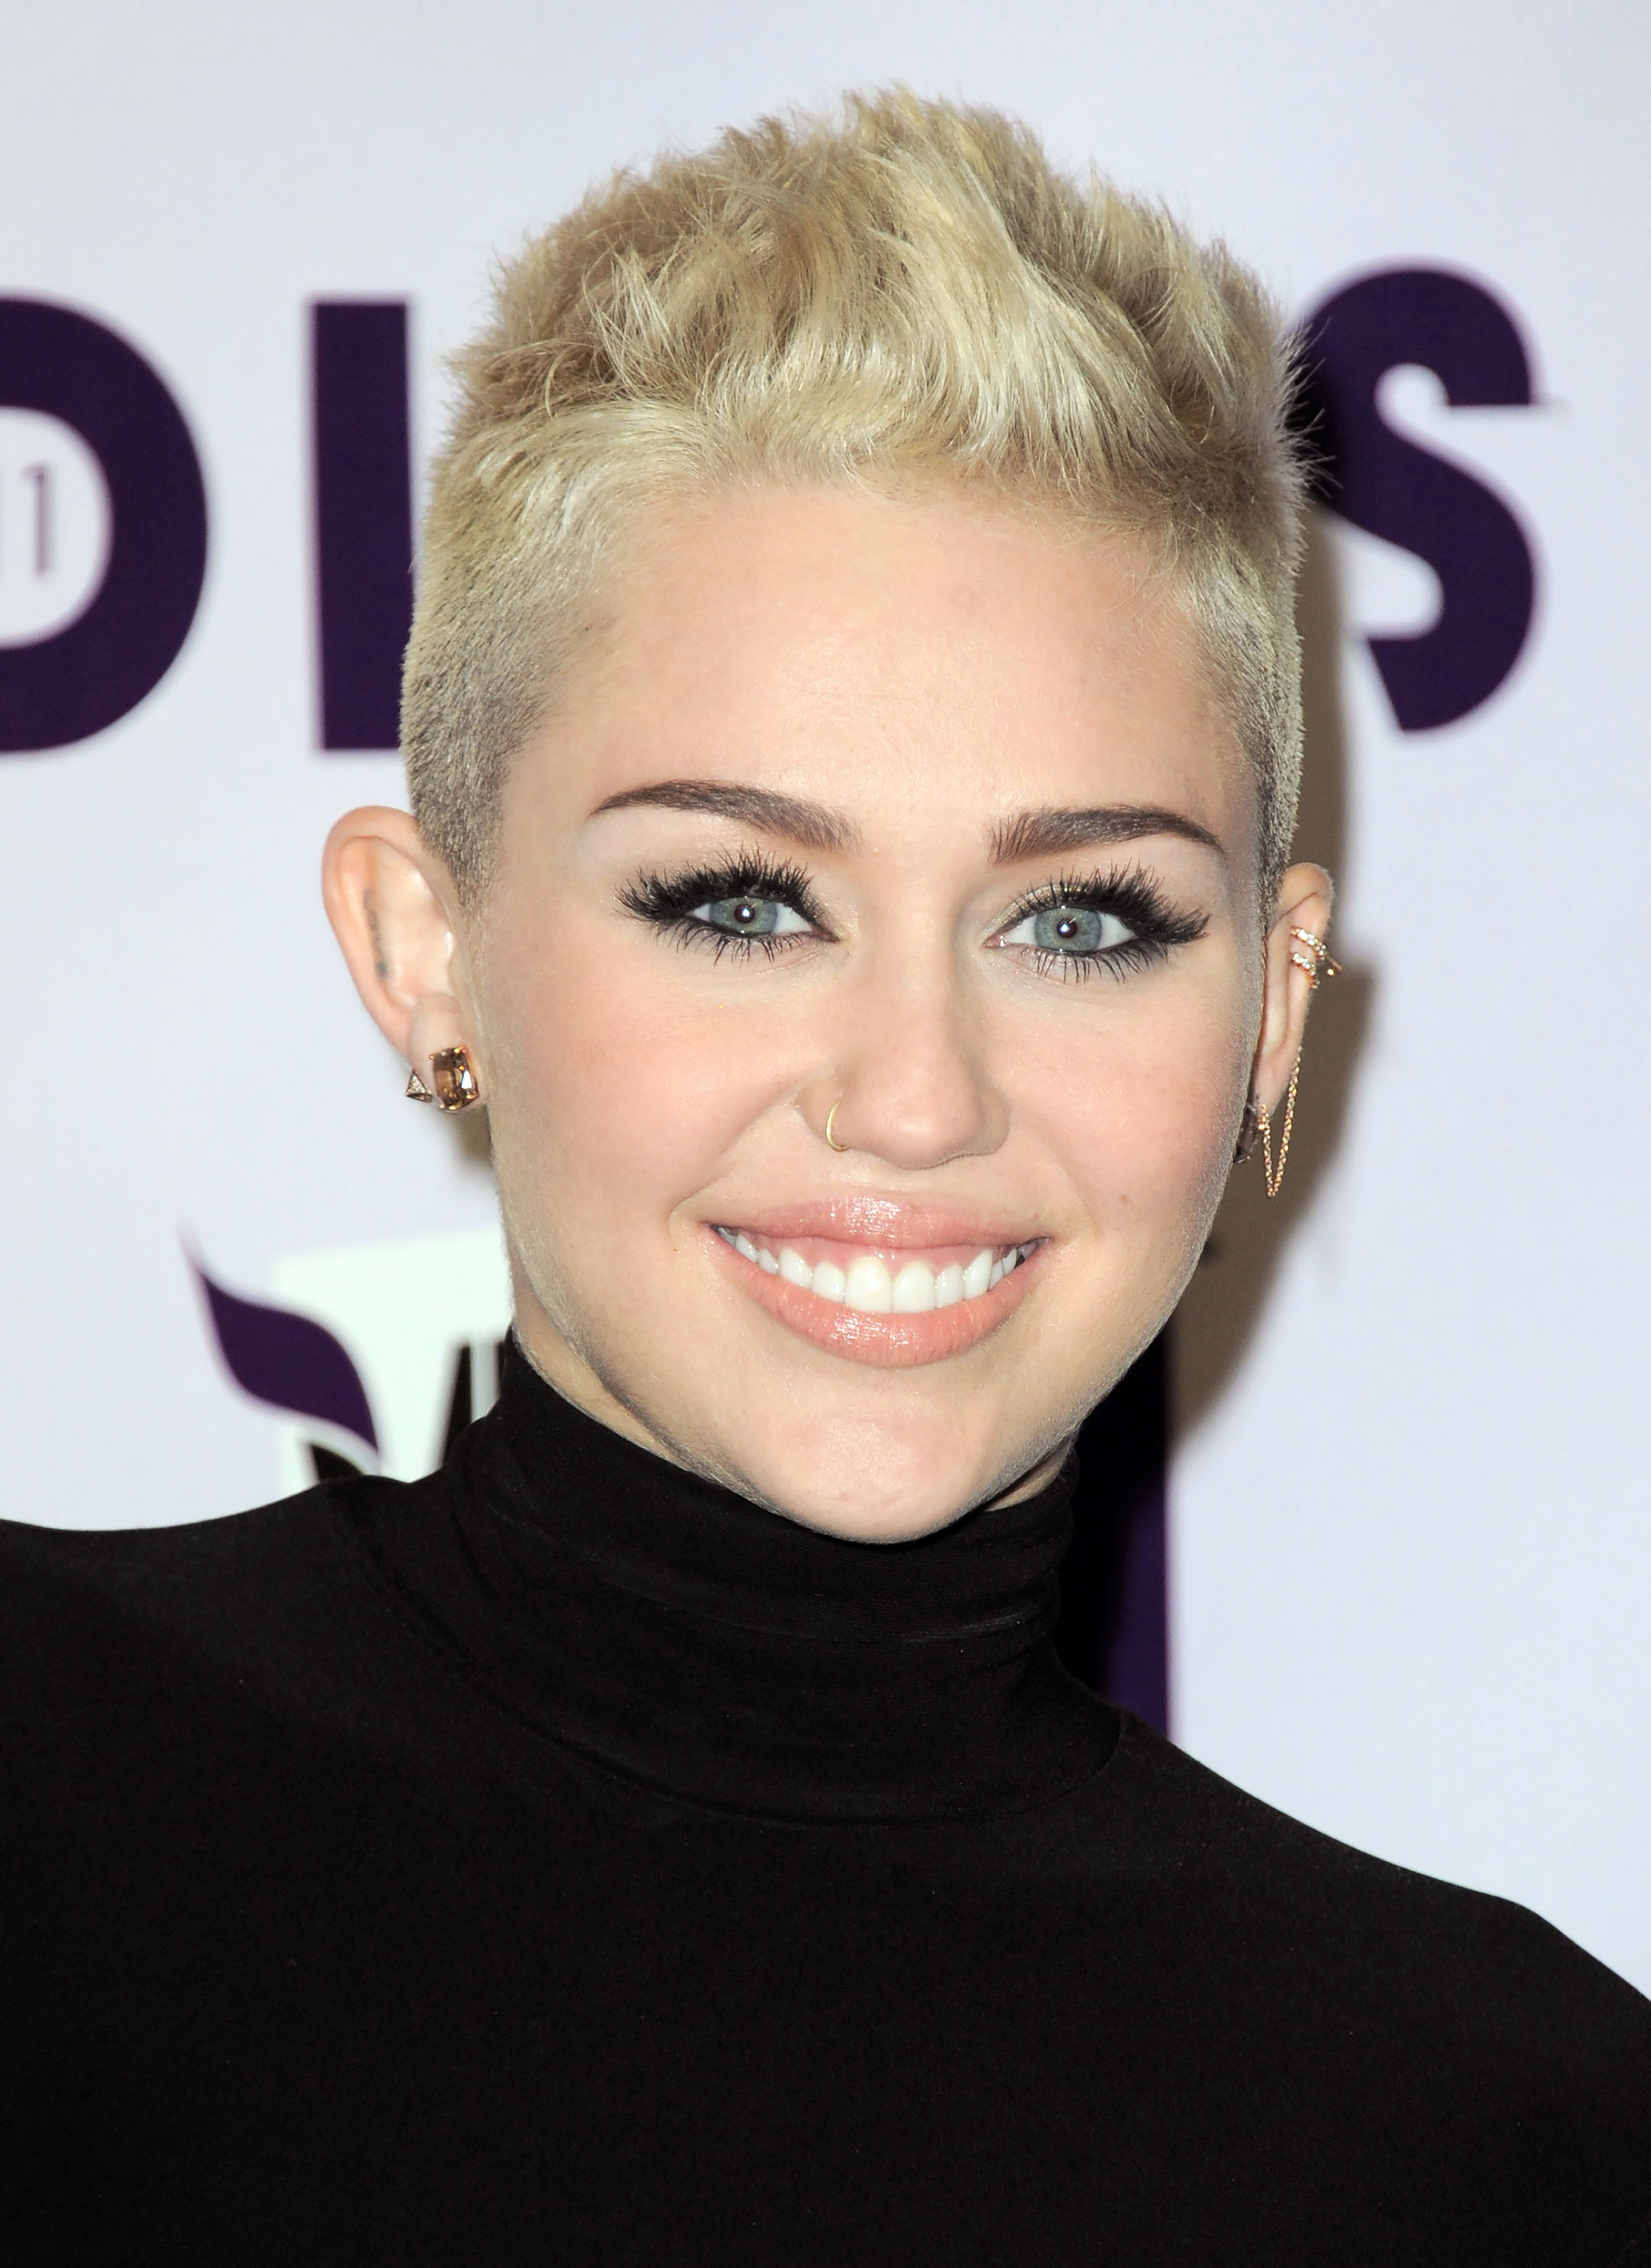 Miley Cyrus Reveals She’s Been in Love 3 Times, Talks Liam Divorce